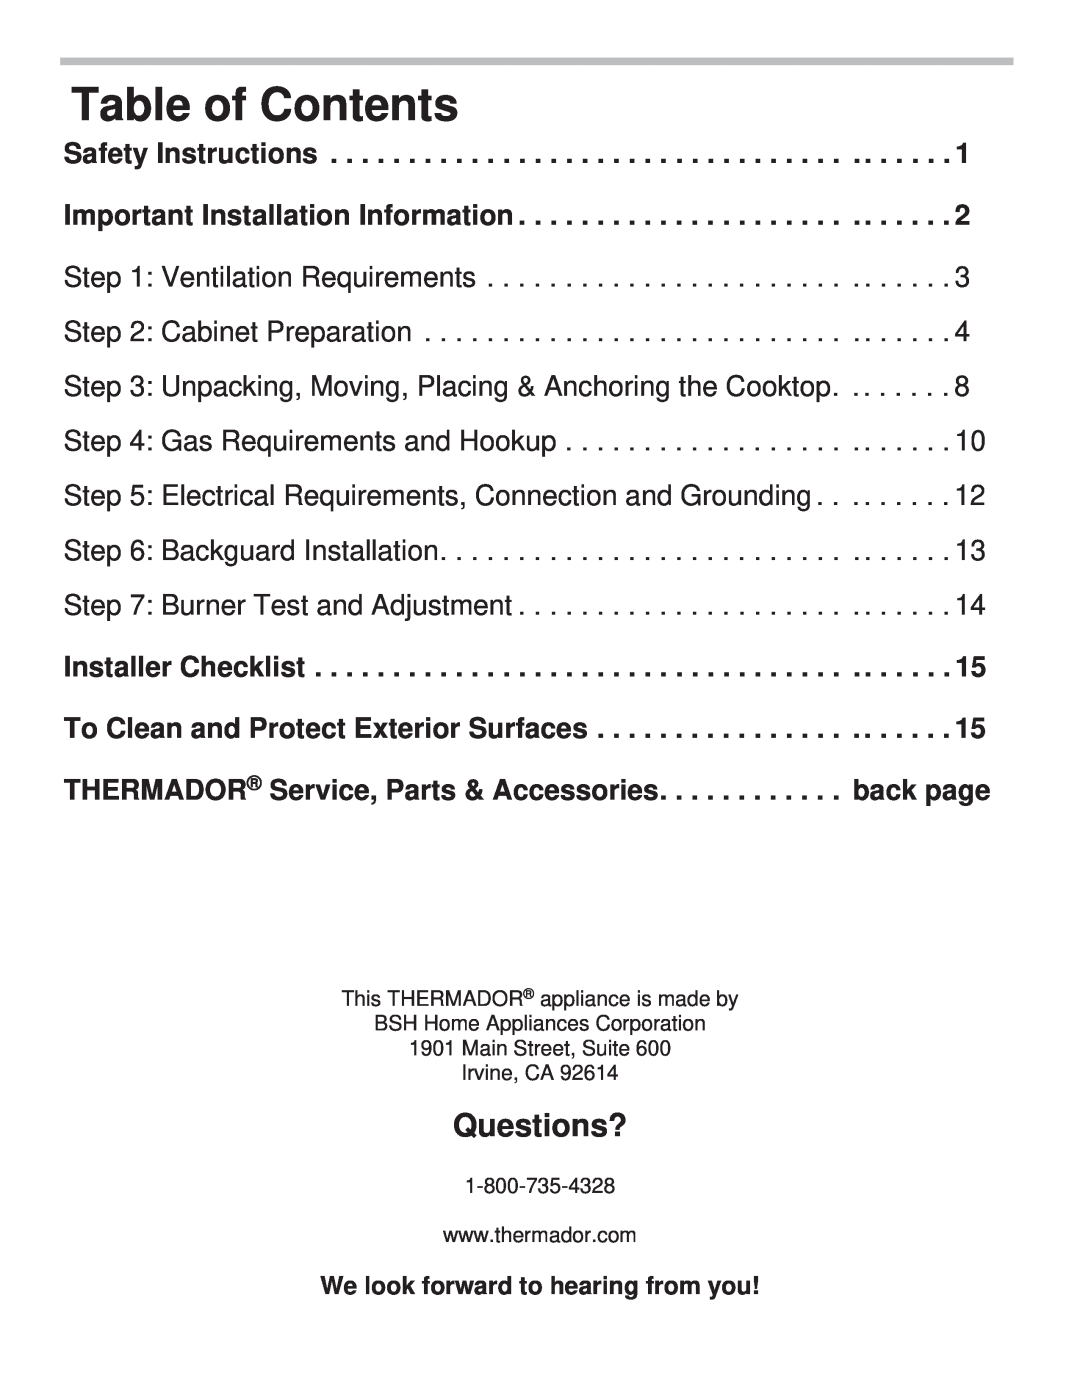 Thermador PCG30, PCG36, PCG48 installation manual Table of Contents, Questions? 